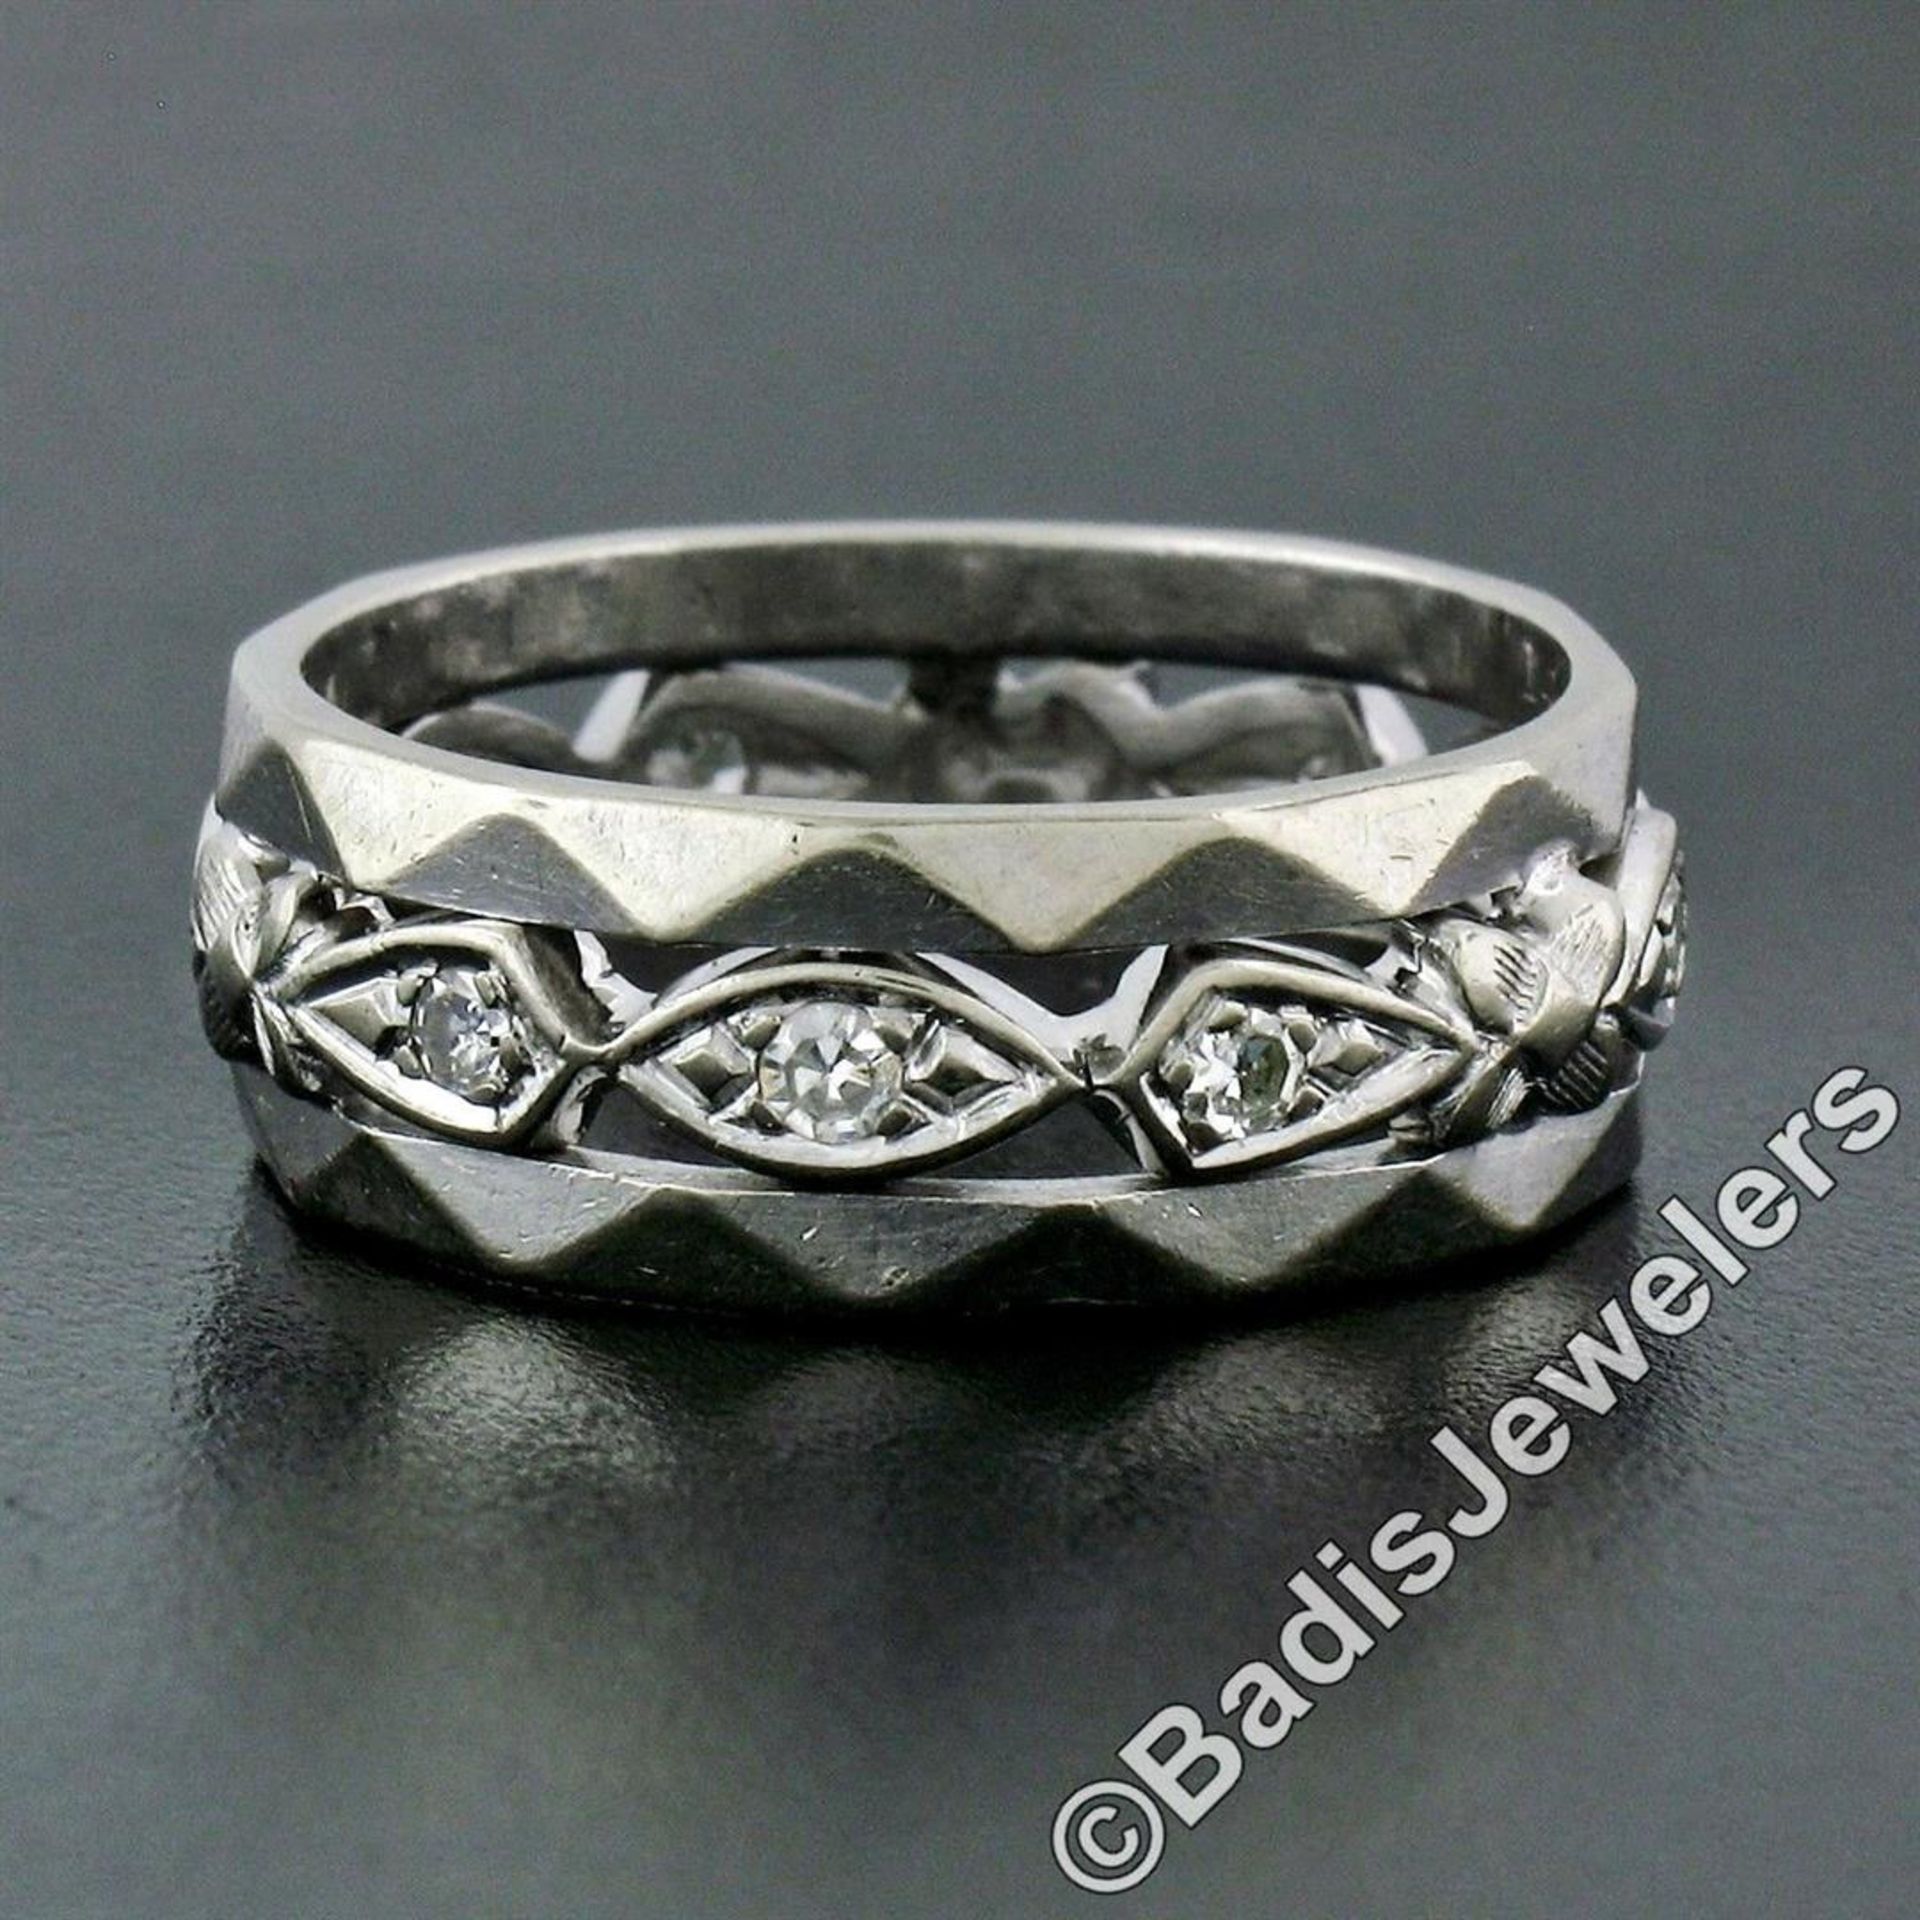 Antique 14kt White Gold 0.20ctw Diamond 7mm Eternity Band Ring - Image 2 of 8